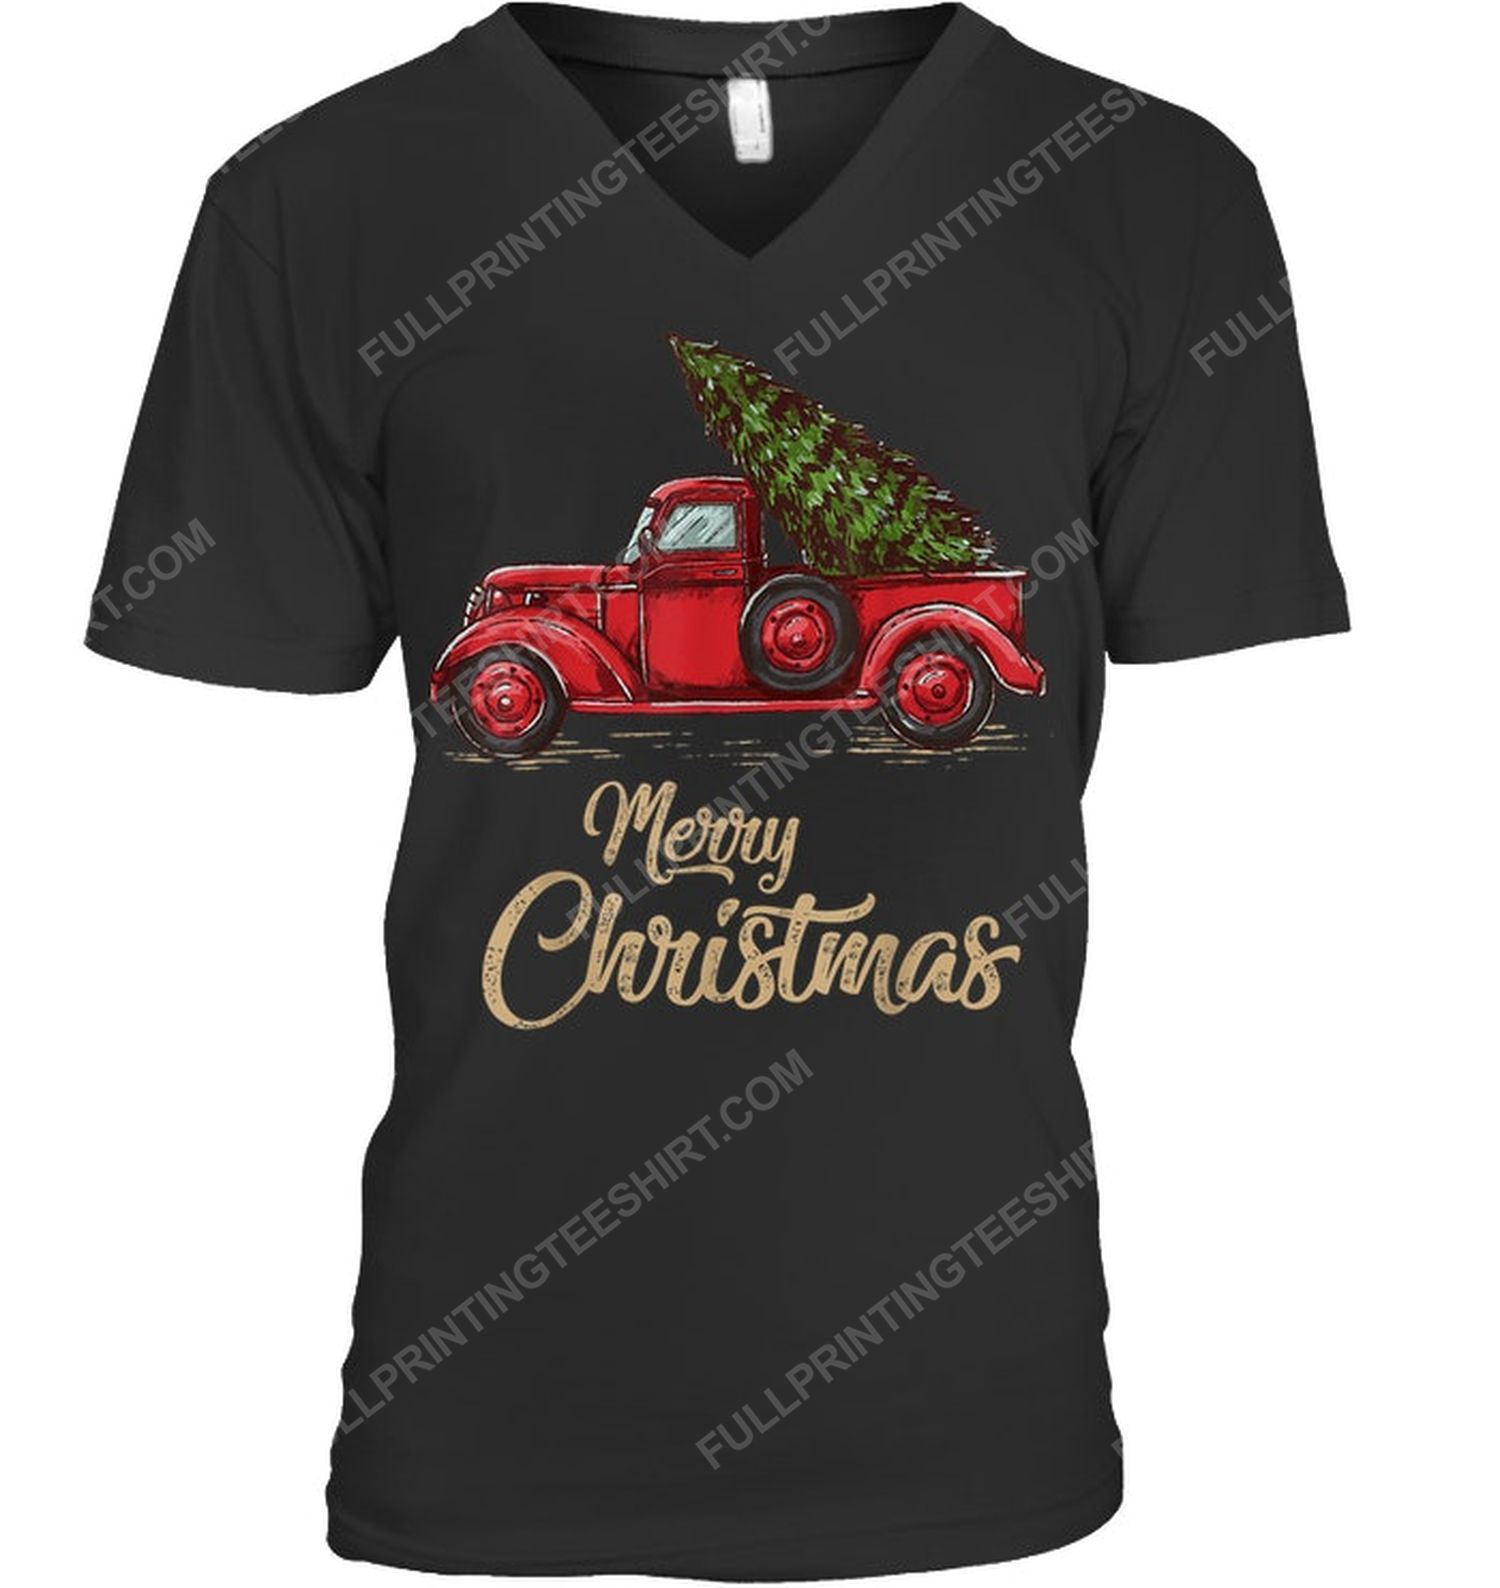 Vintage red truck with merry christmas tree v-neck